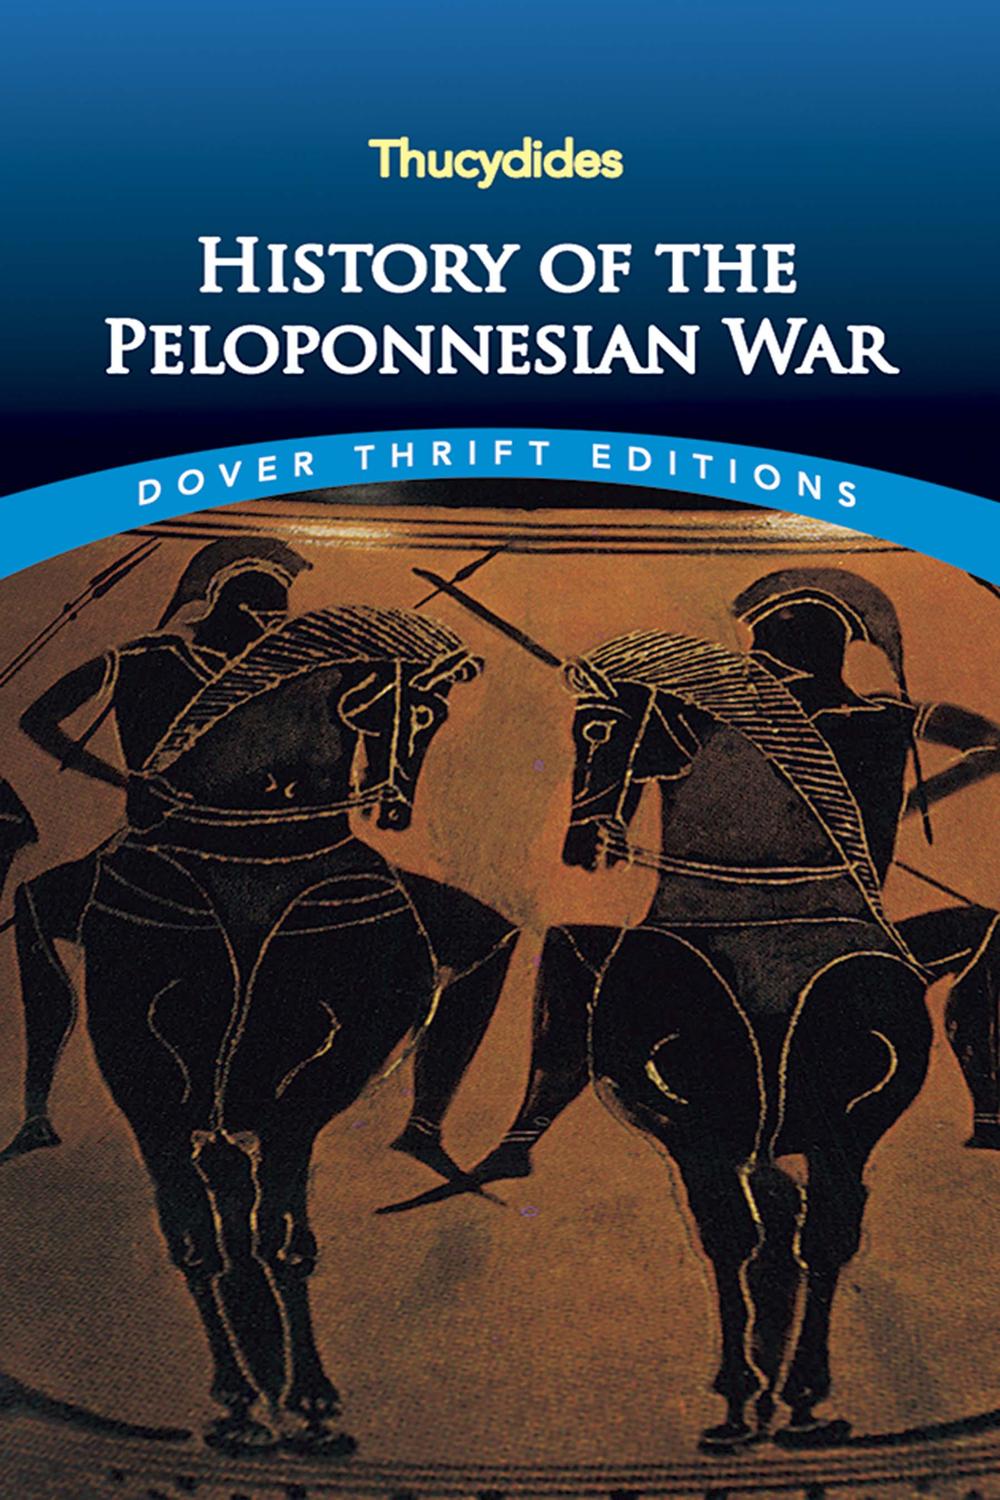 History of the Peloponnesian War - Thucydides